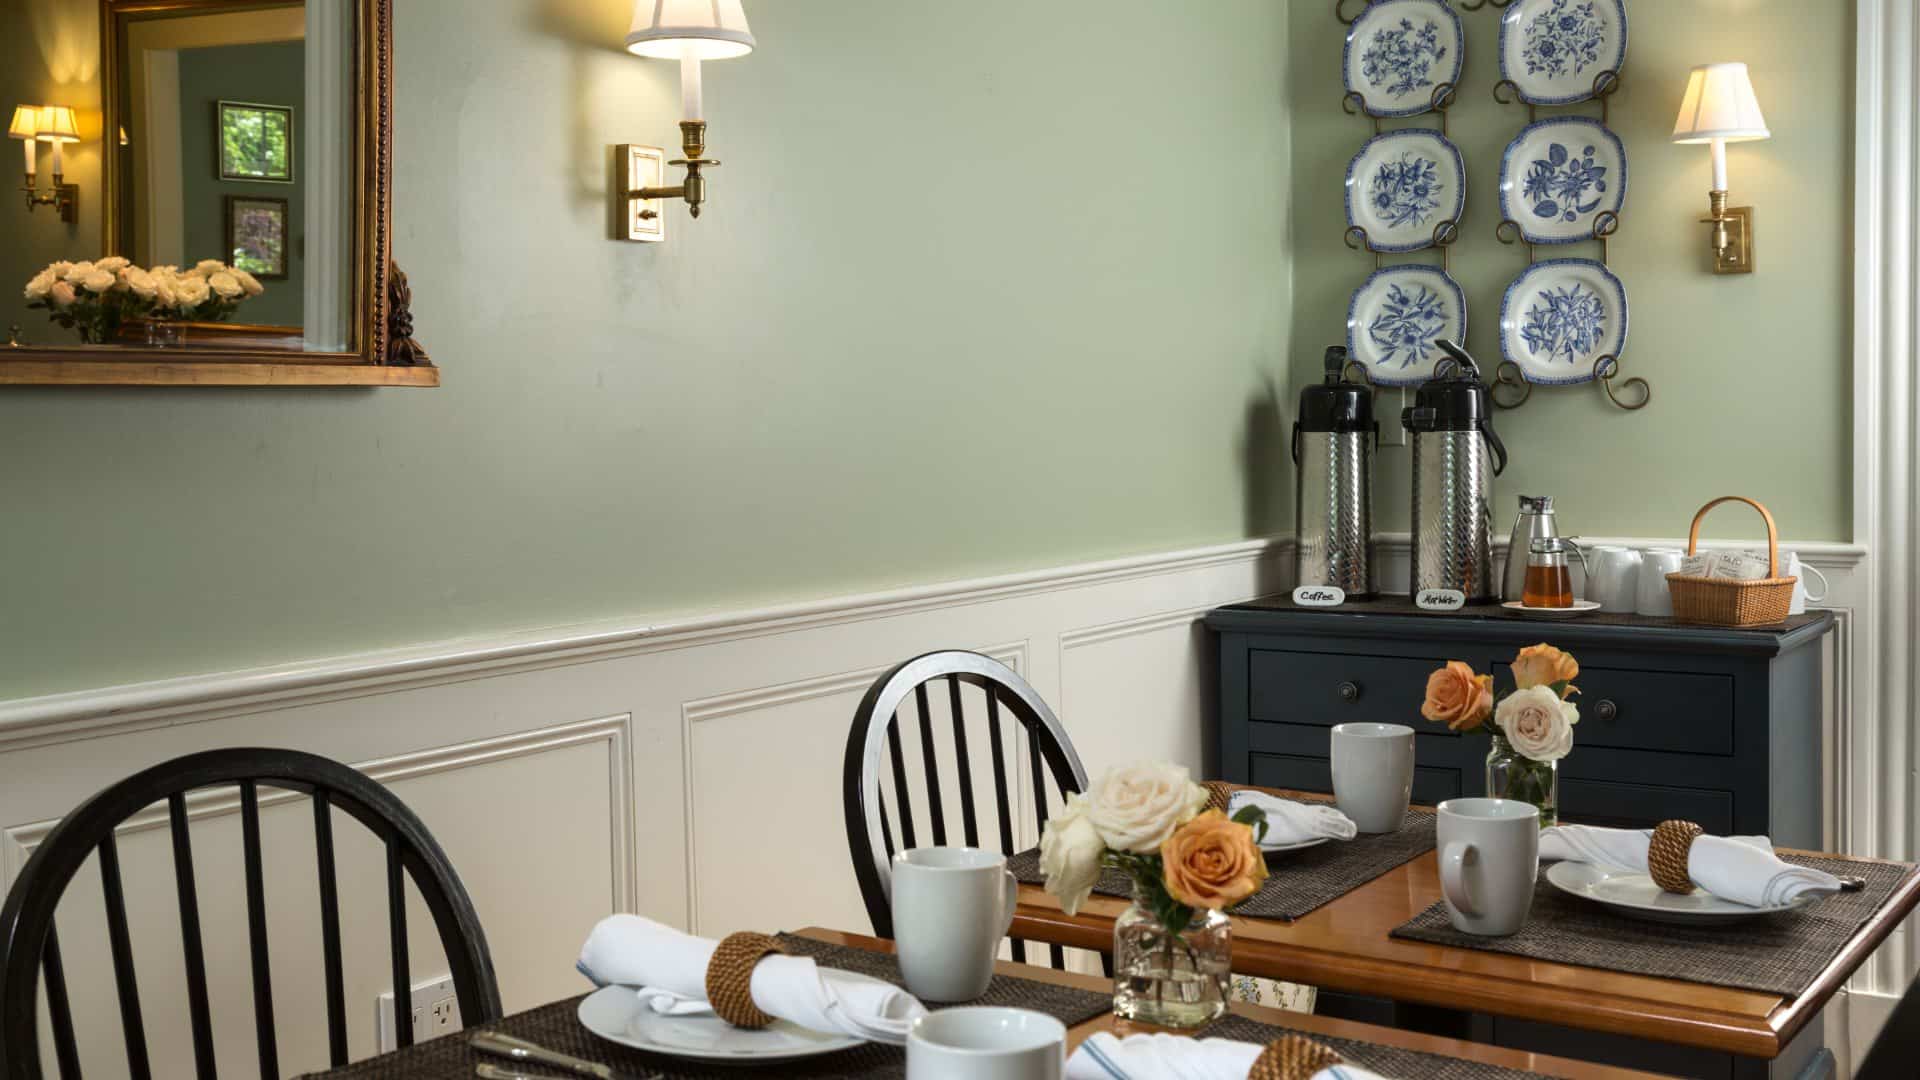 Dining area with wooden tables, black wooden chairs, light sage green walls, white wainscoting, and blue and white plates hanging on the wall